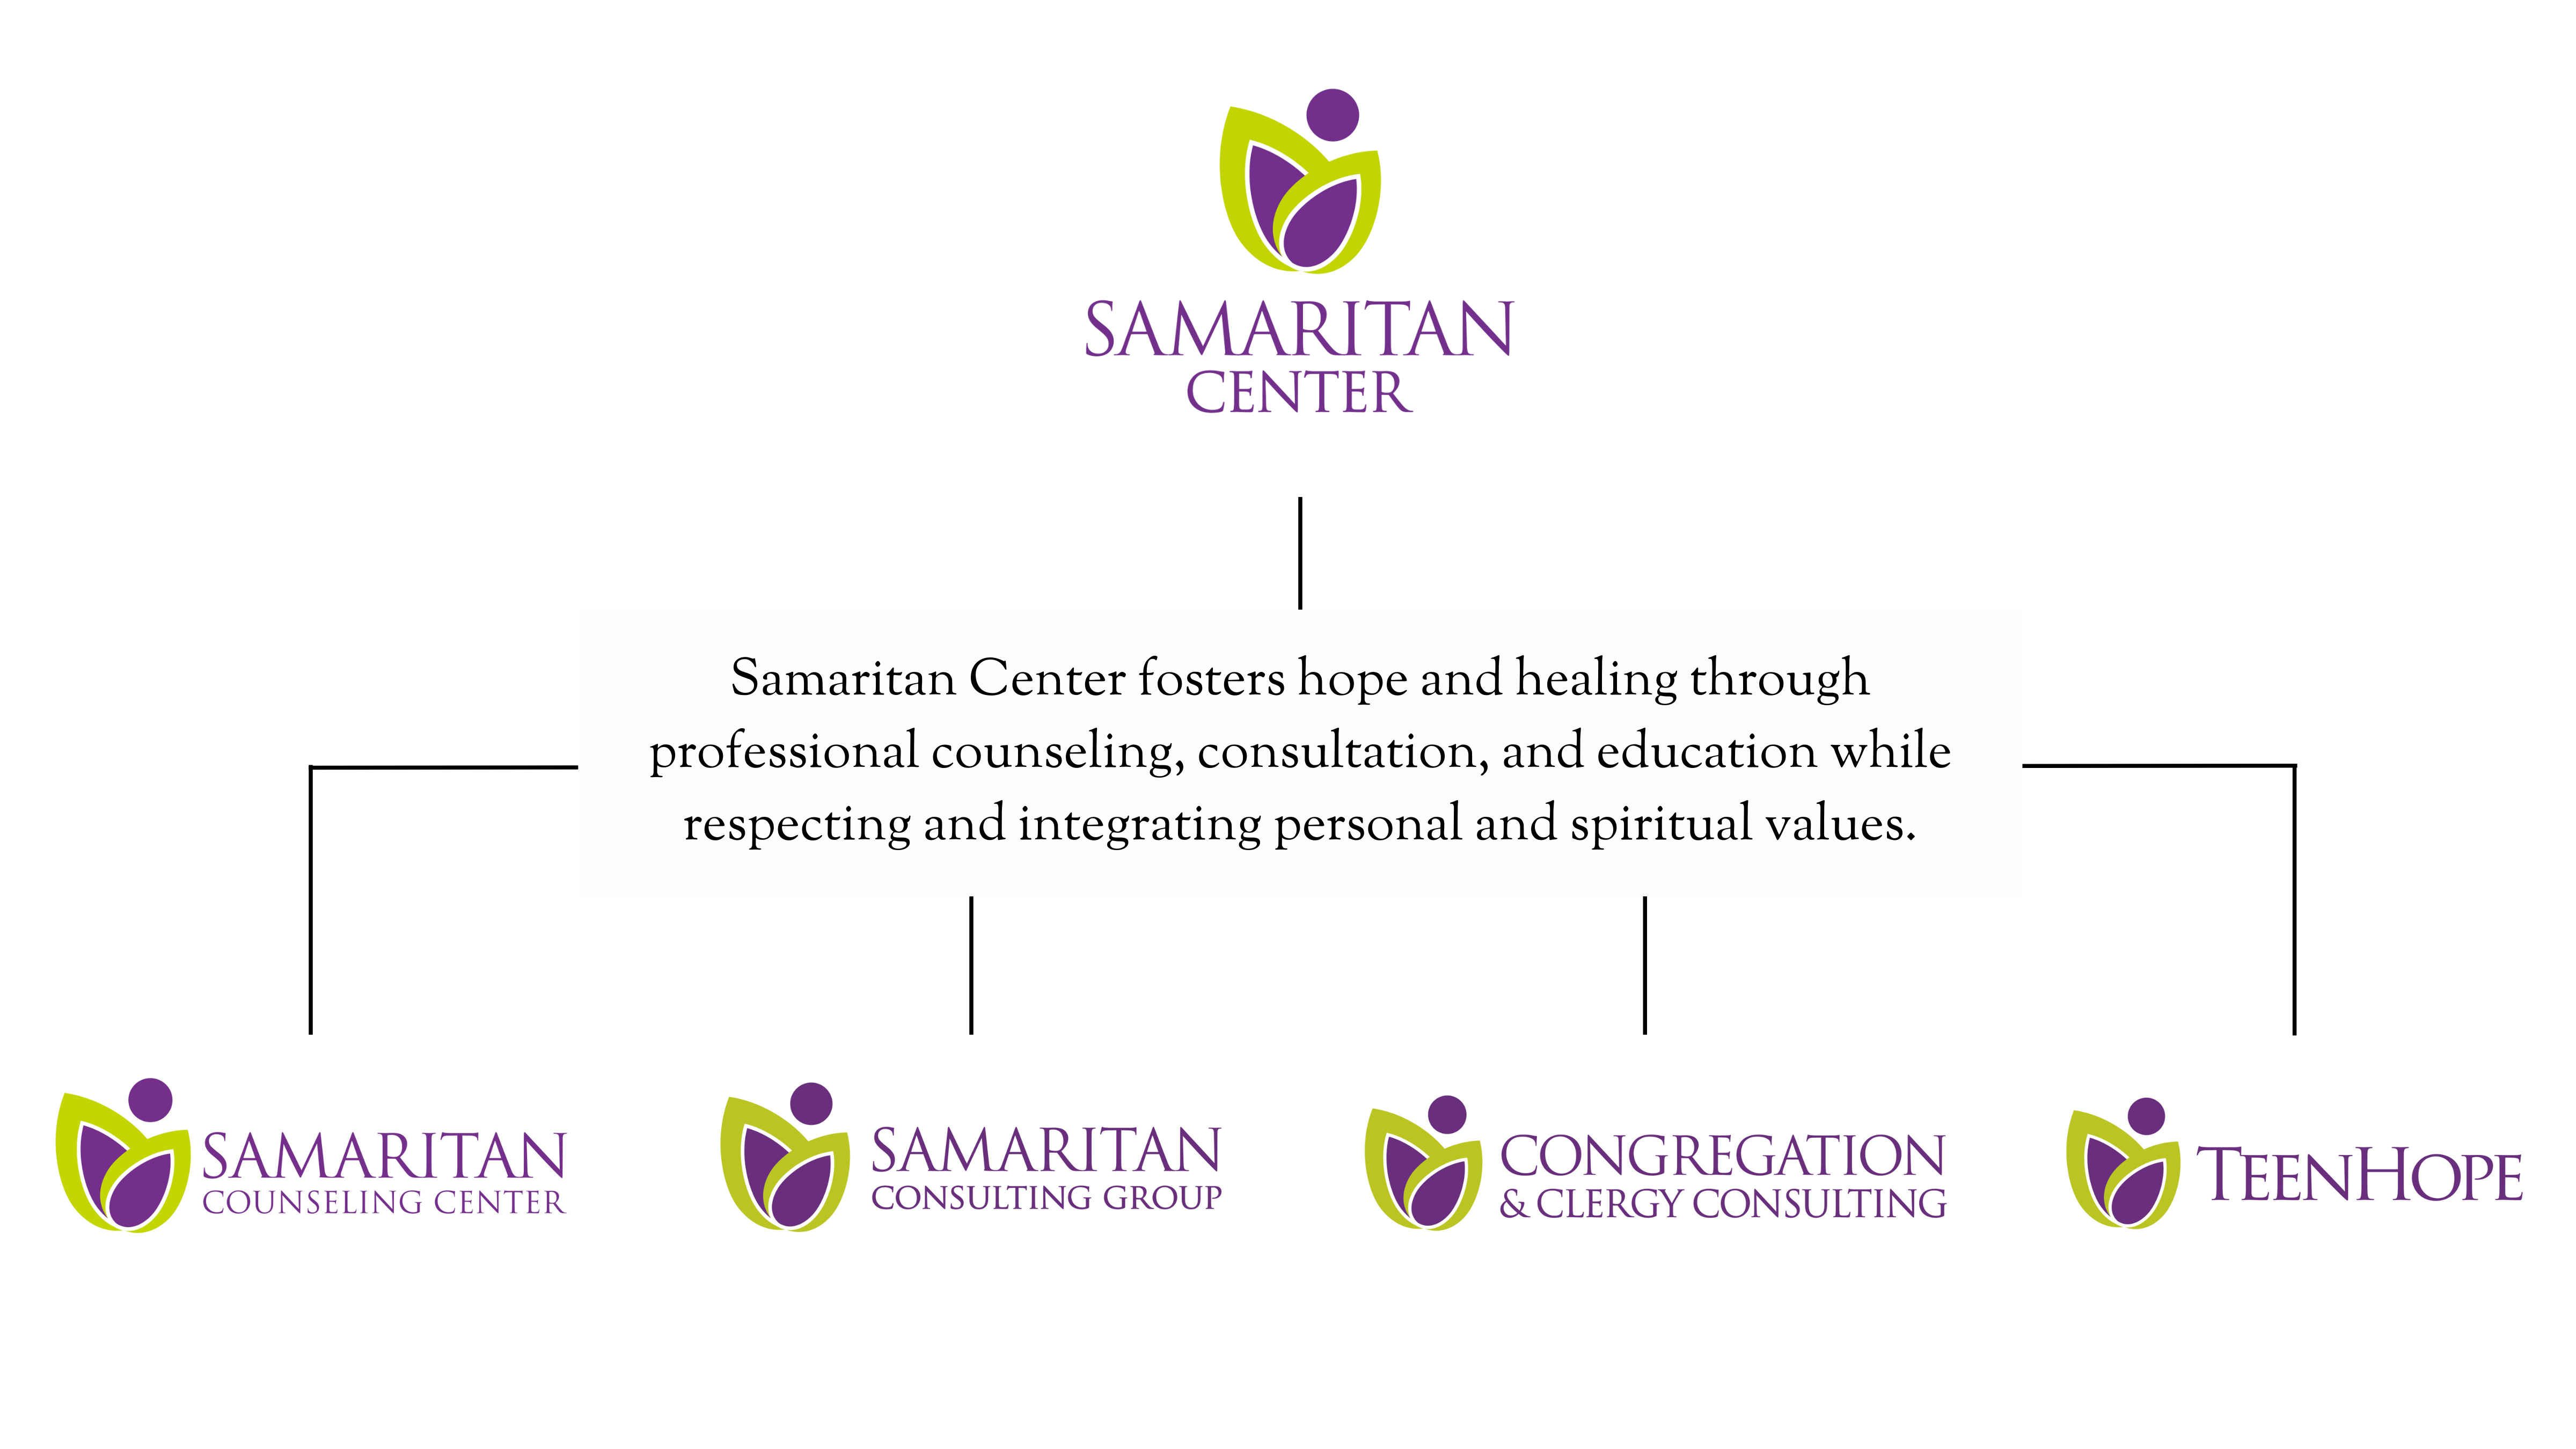 Samaritan Center fosters hope and healing through professional counseling, consultation, and education while respecting and integrating personal and spiritual values.